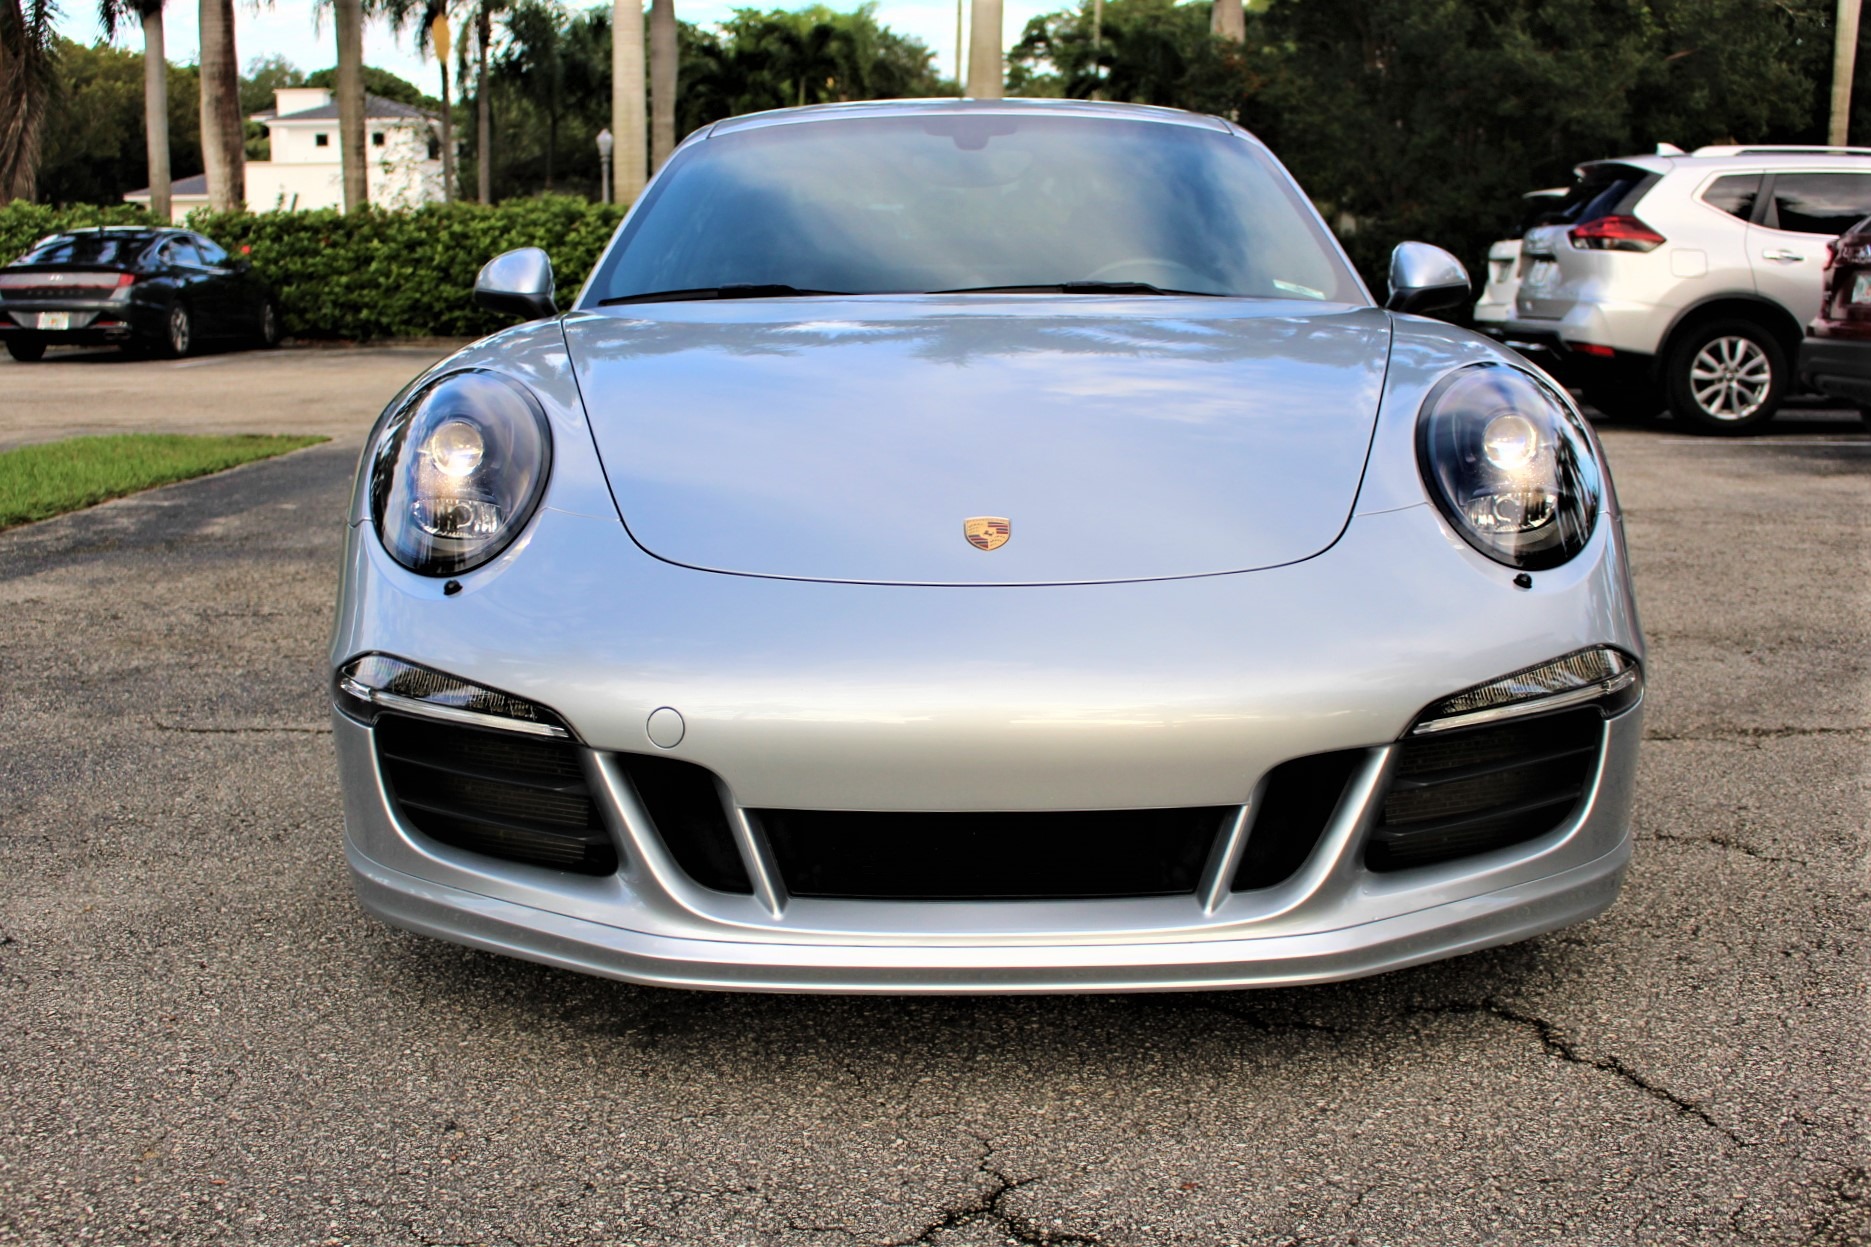 Used 2015 Porsche 911 Carrera GTS for sale Sold at The Gables Sports Cars in Miami FL 33146 4